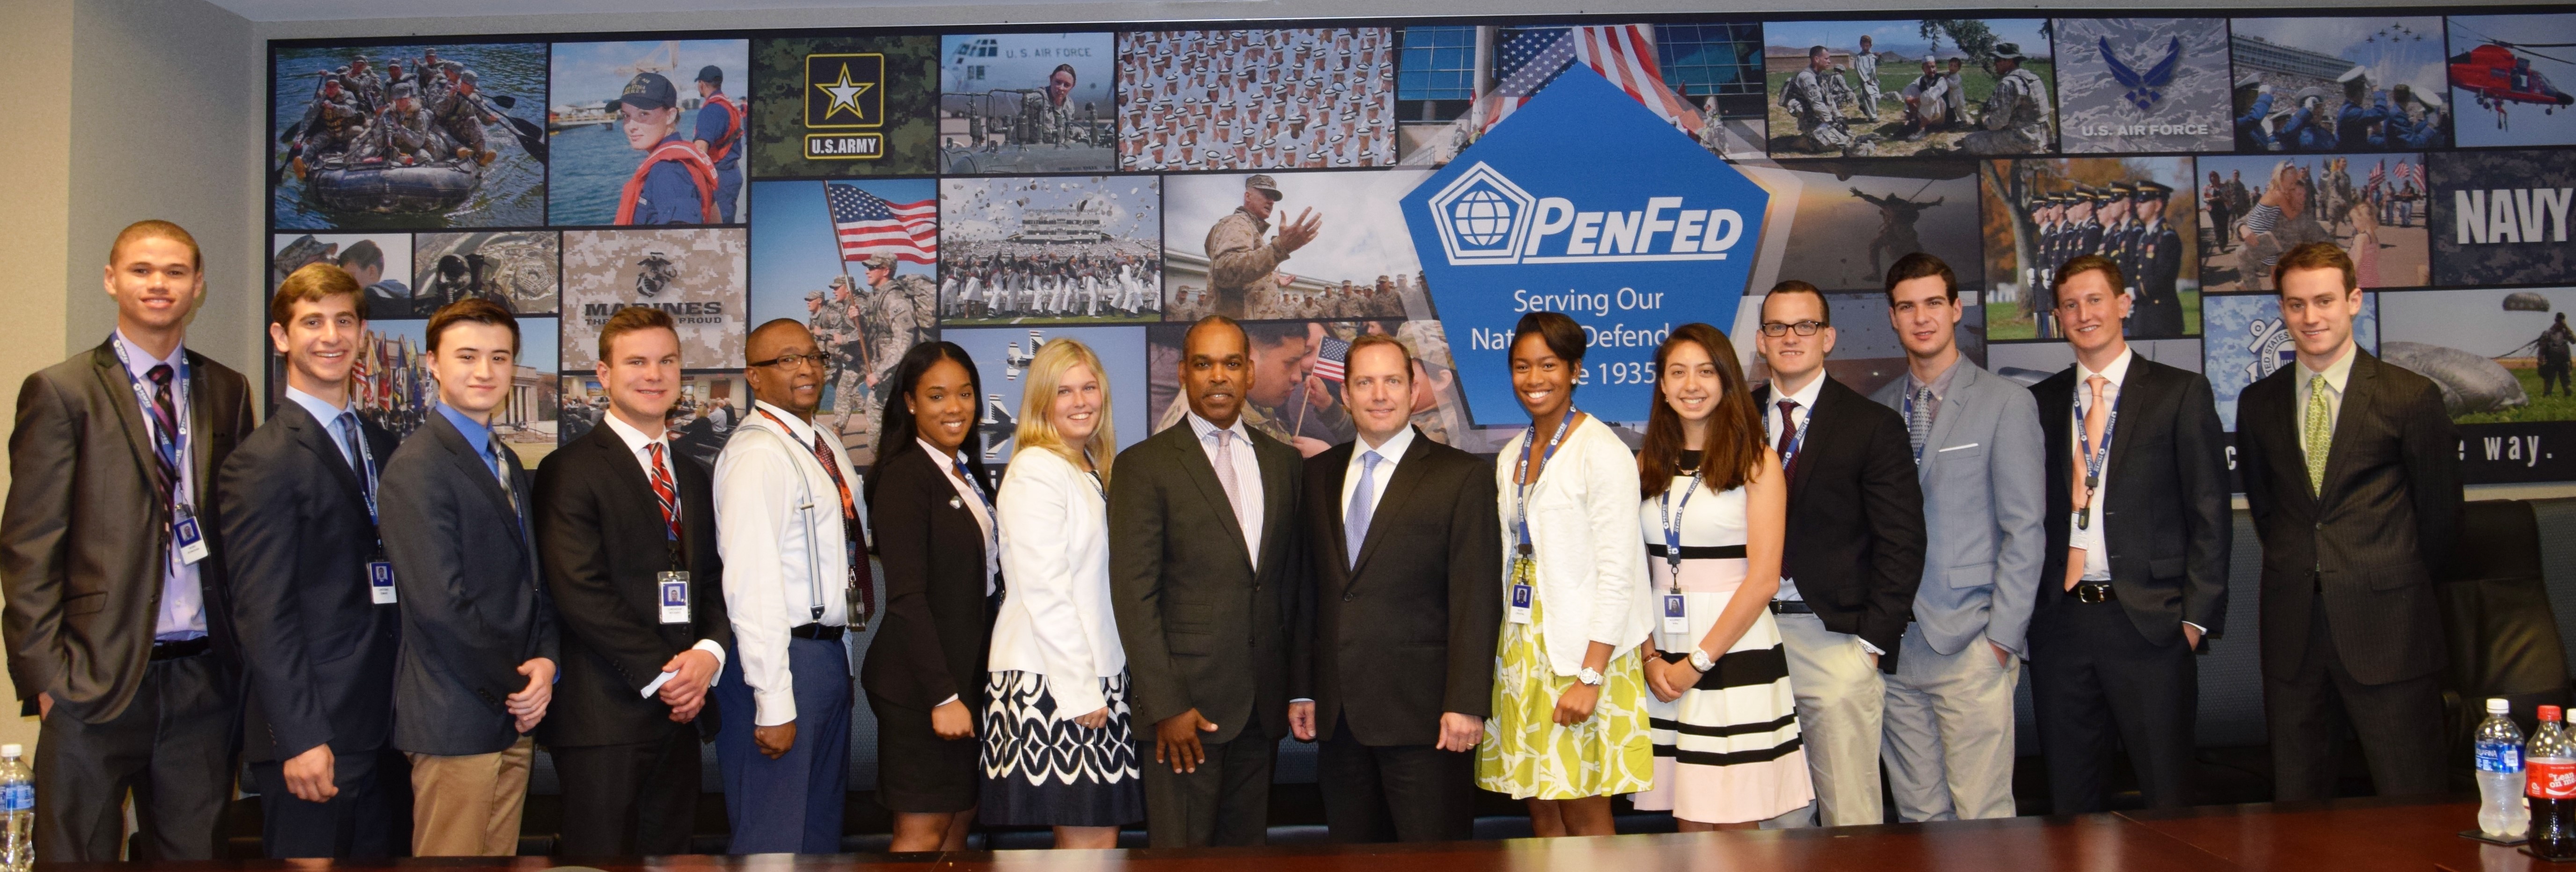 Interns gain CU difference insight from PenFed execs  20160610